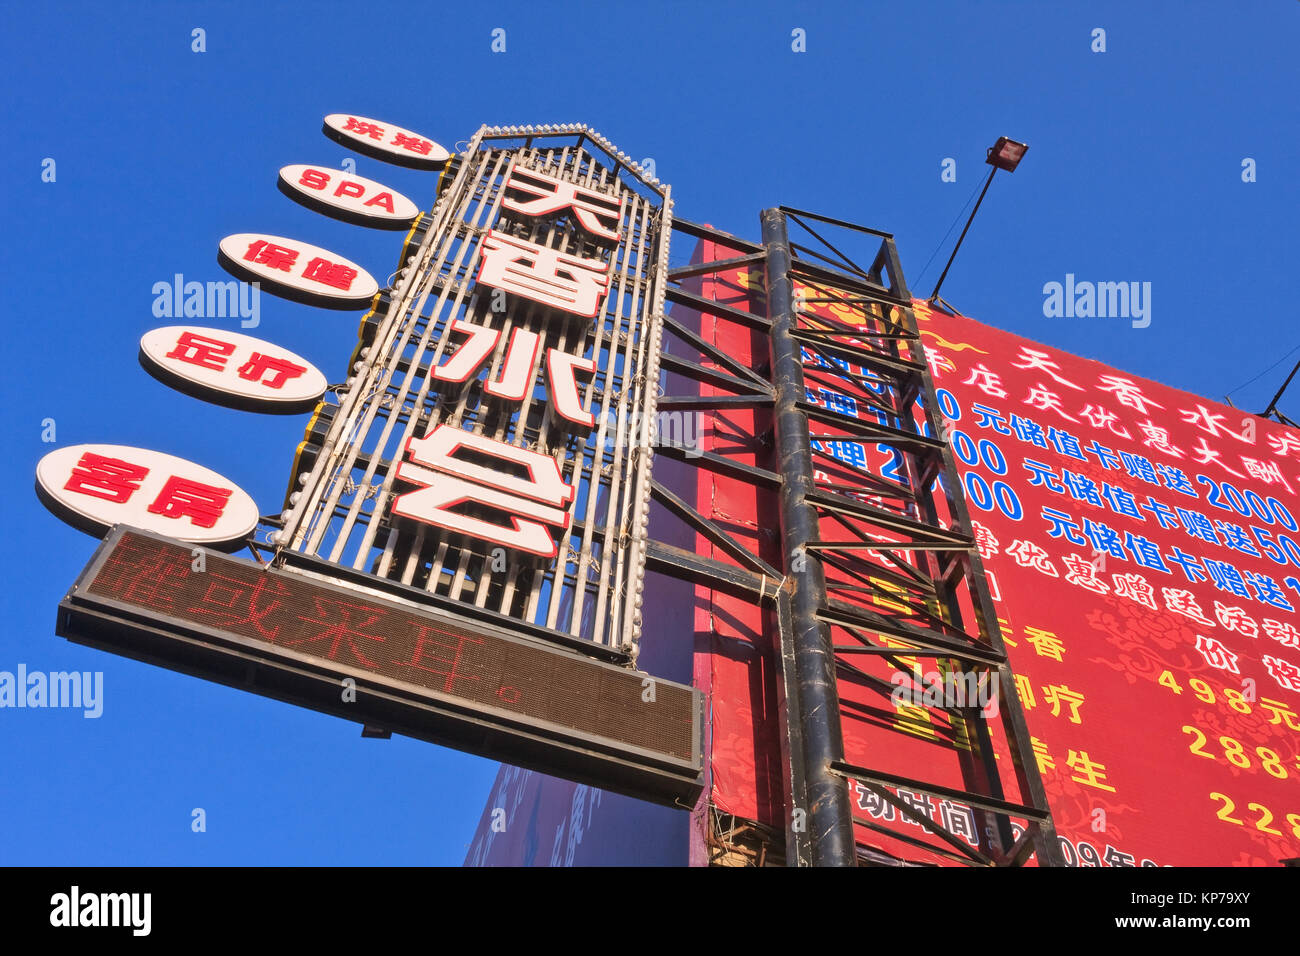 CHANGCHUN-MARCH 10, 2012. Metal frame with outdoor advertising. Outdoor advertising became China’s third largest medium after TV and print media. Stock Photo